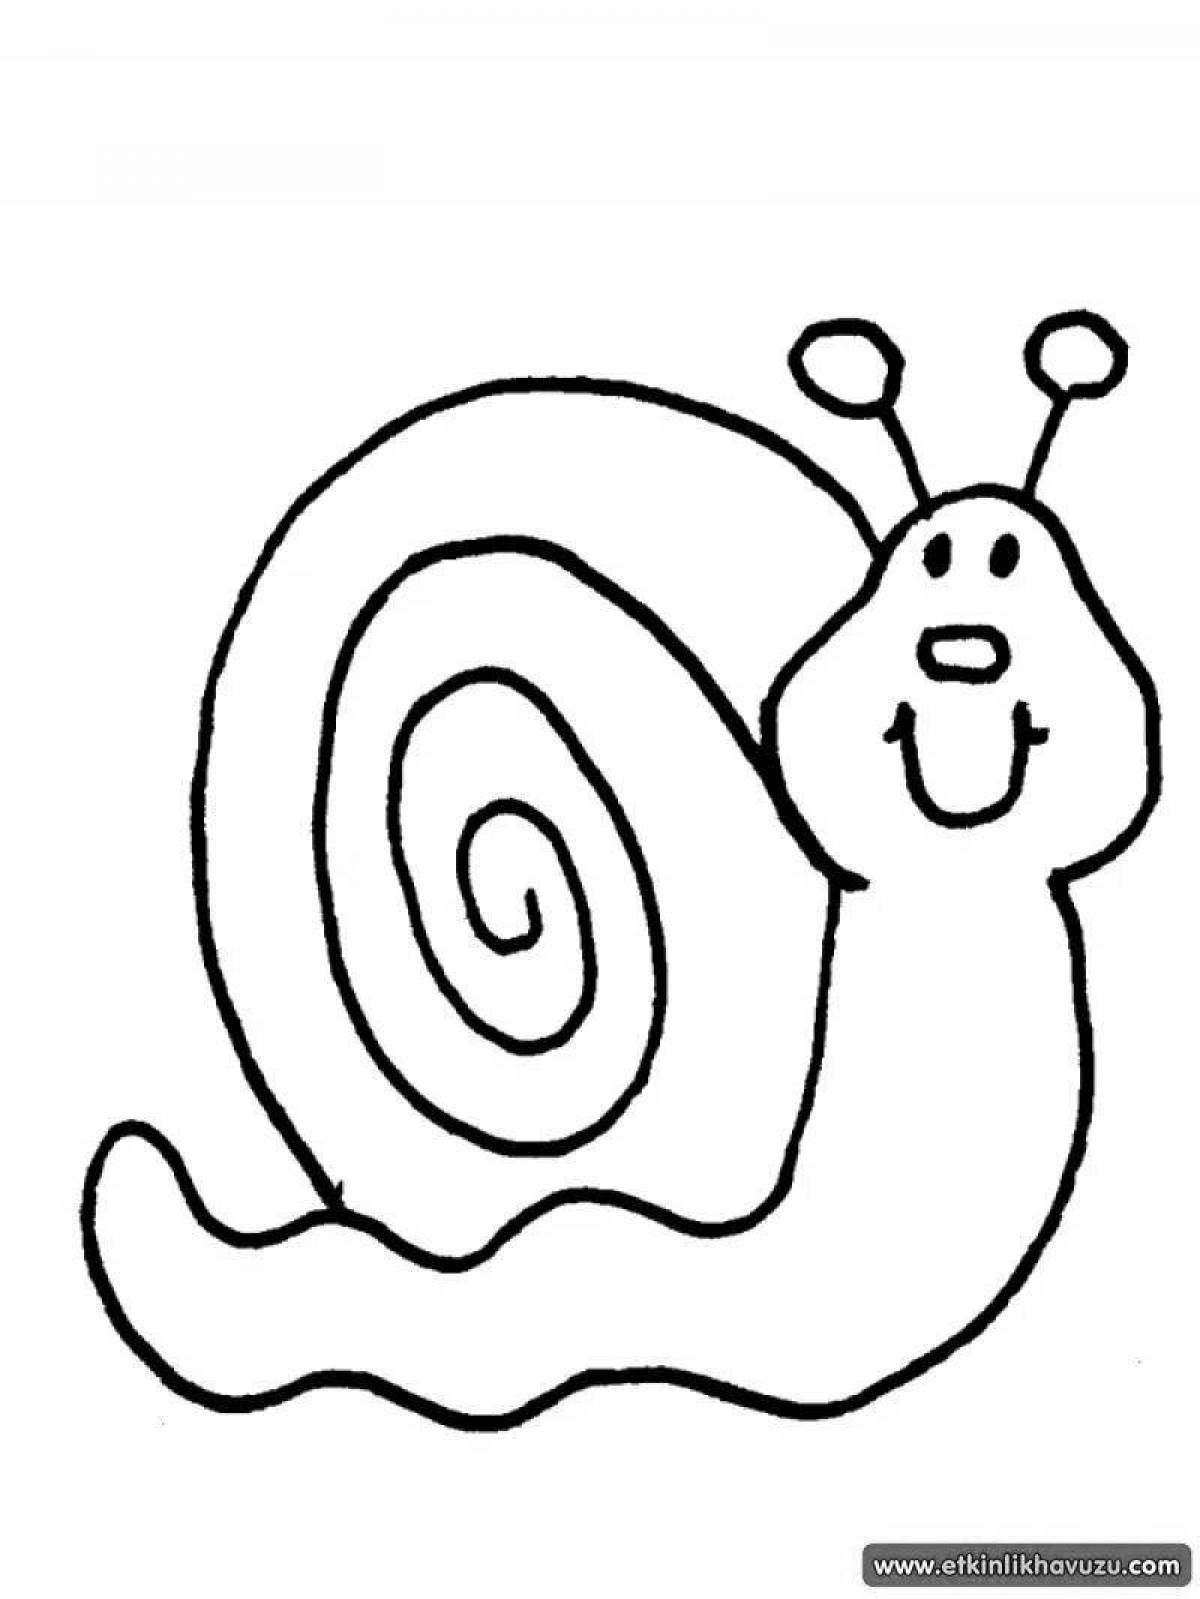 Colored crazy snail drawing for kids